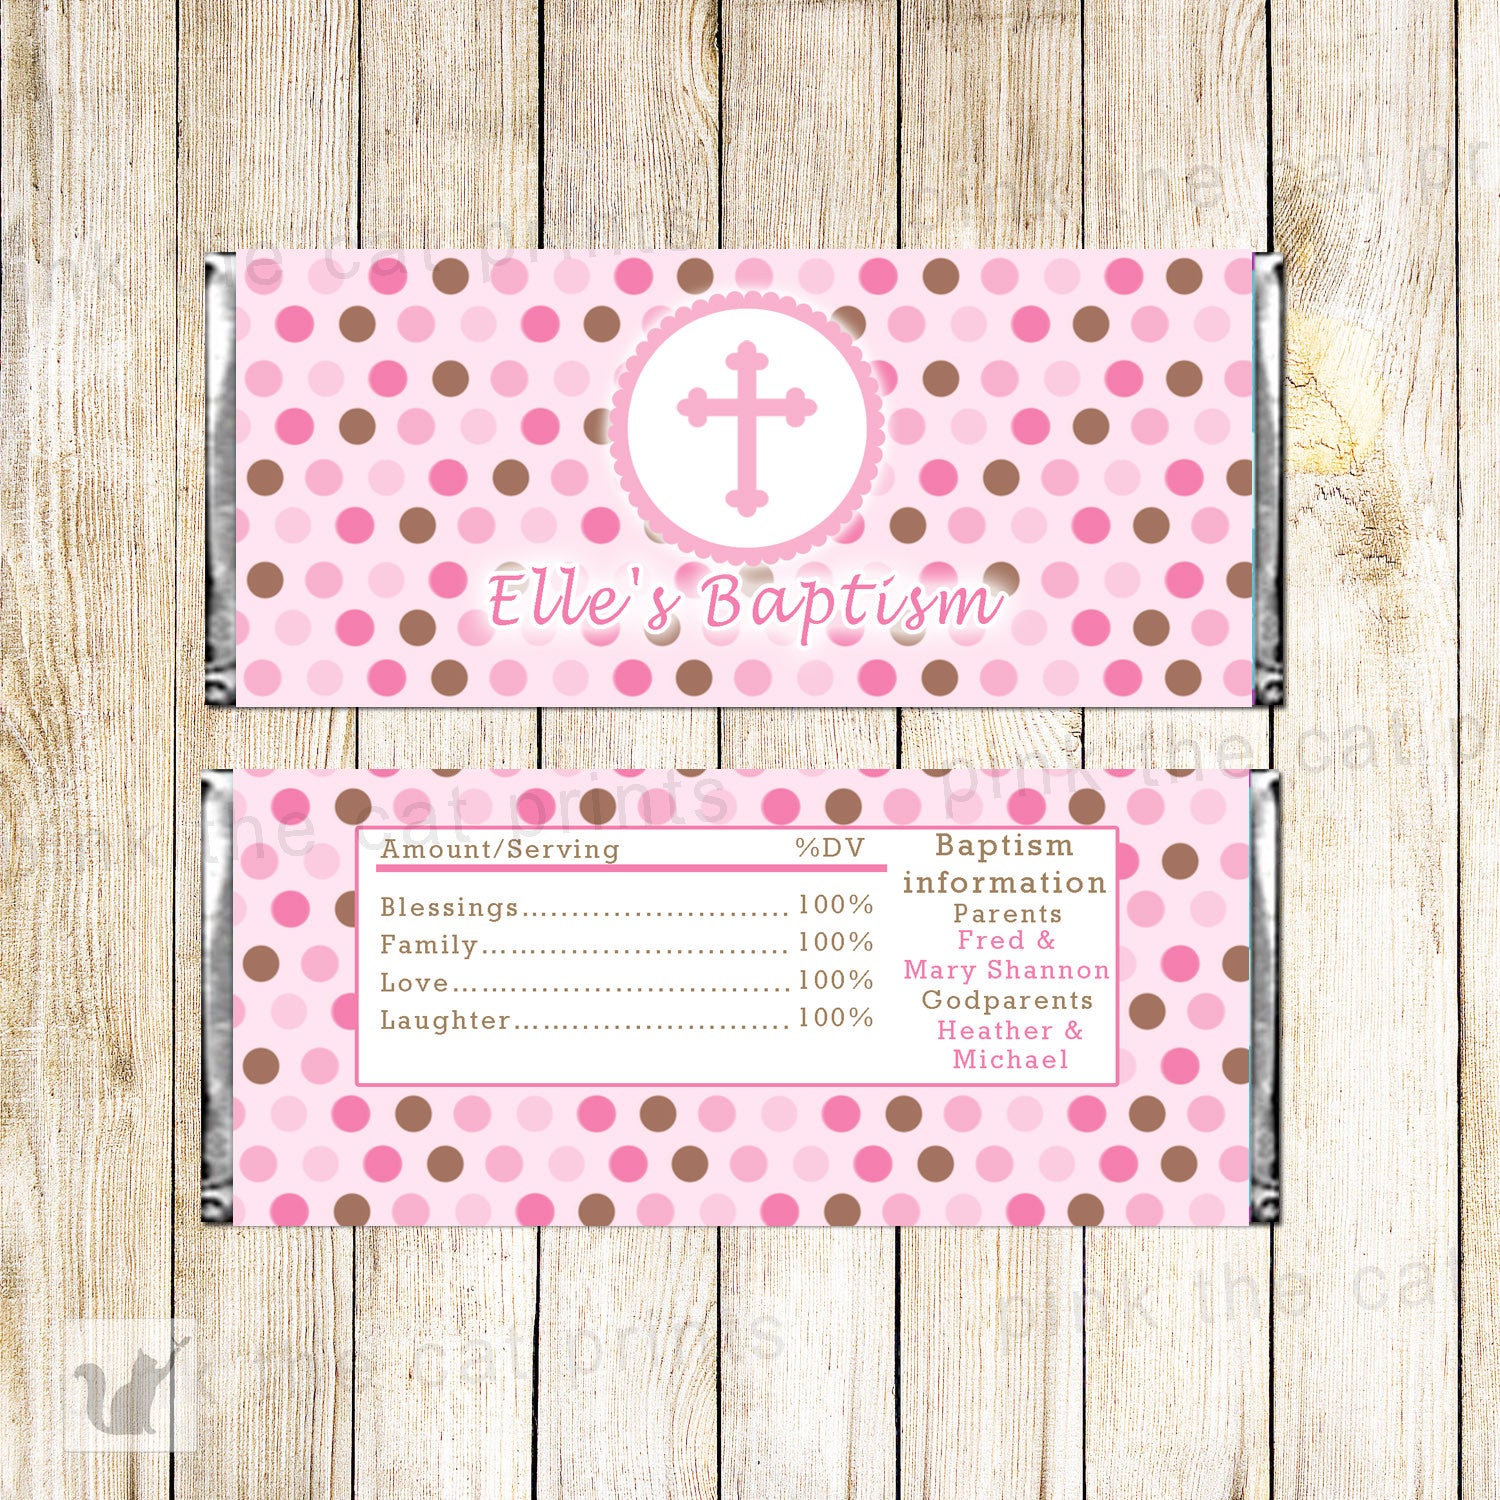 50 Candy Bar Wrappers Girl Baptism Christening Pink